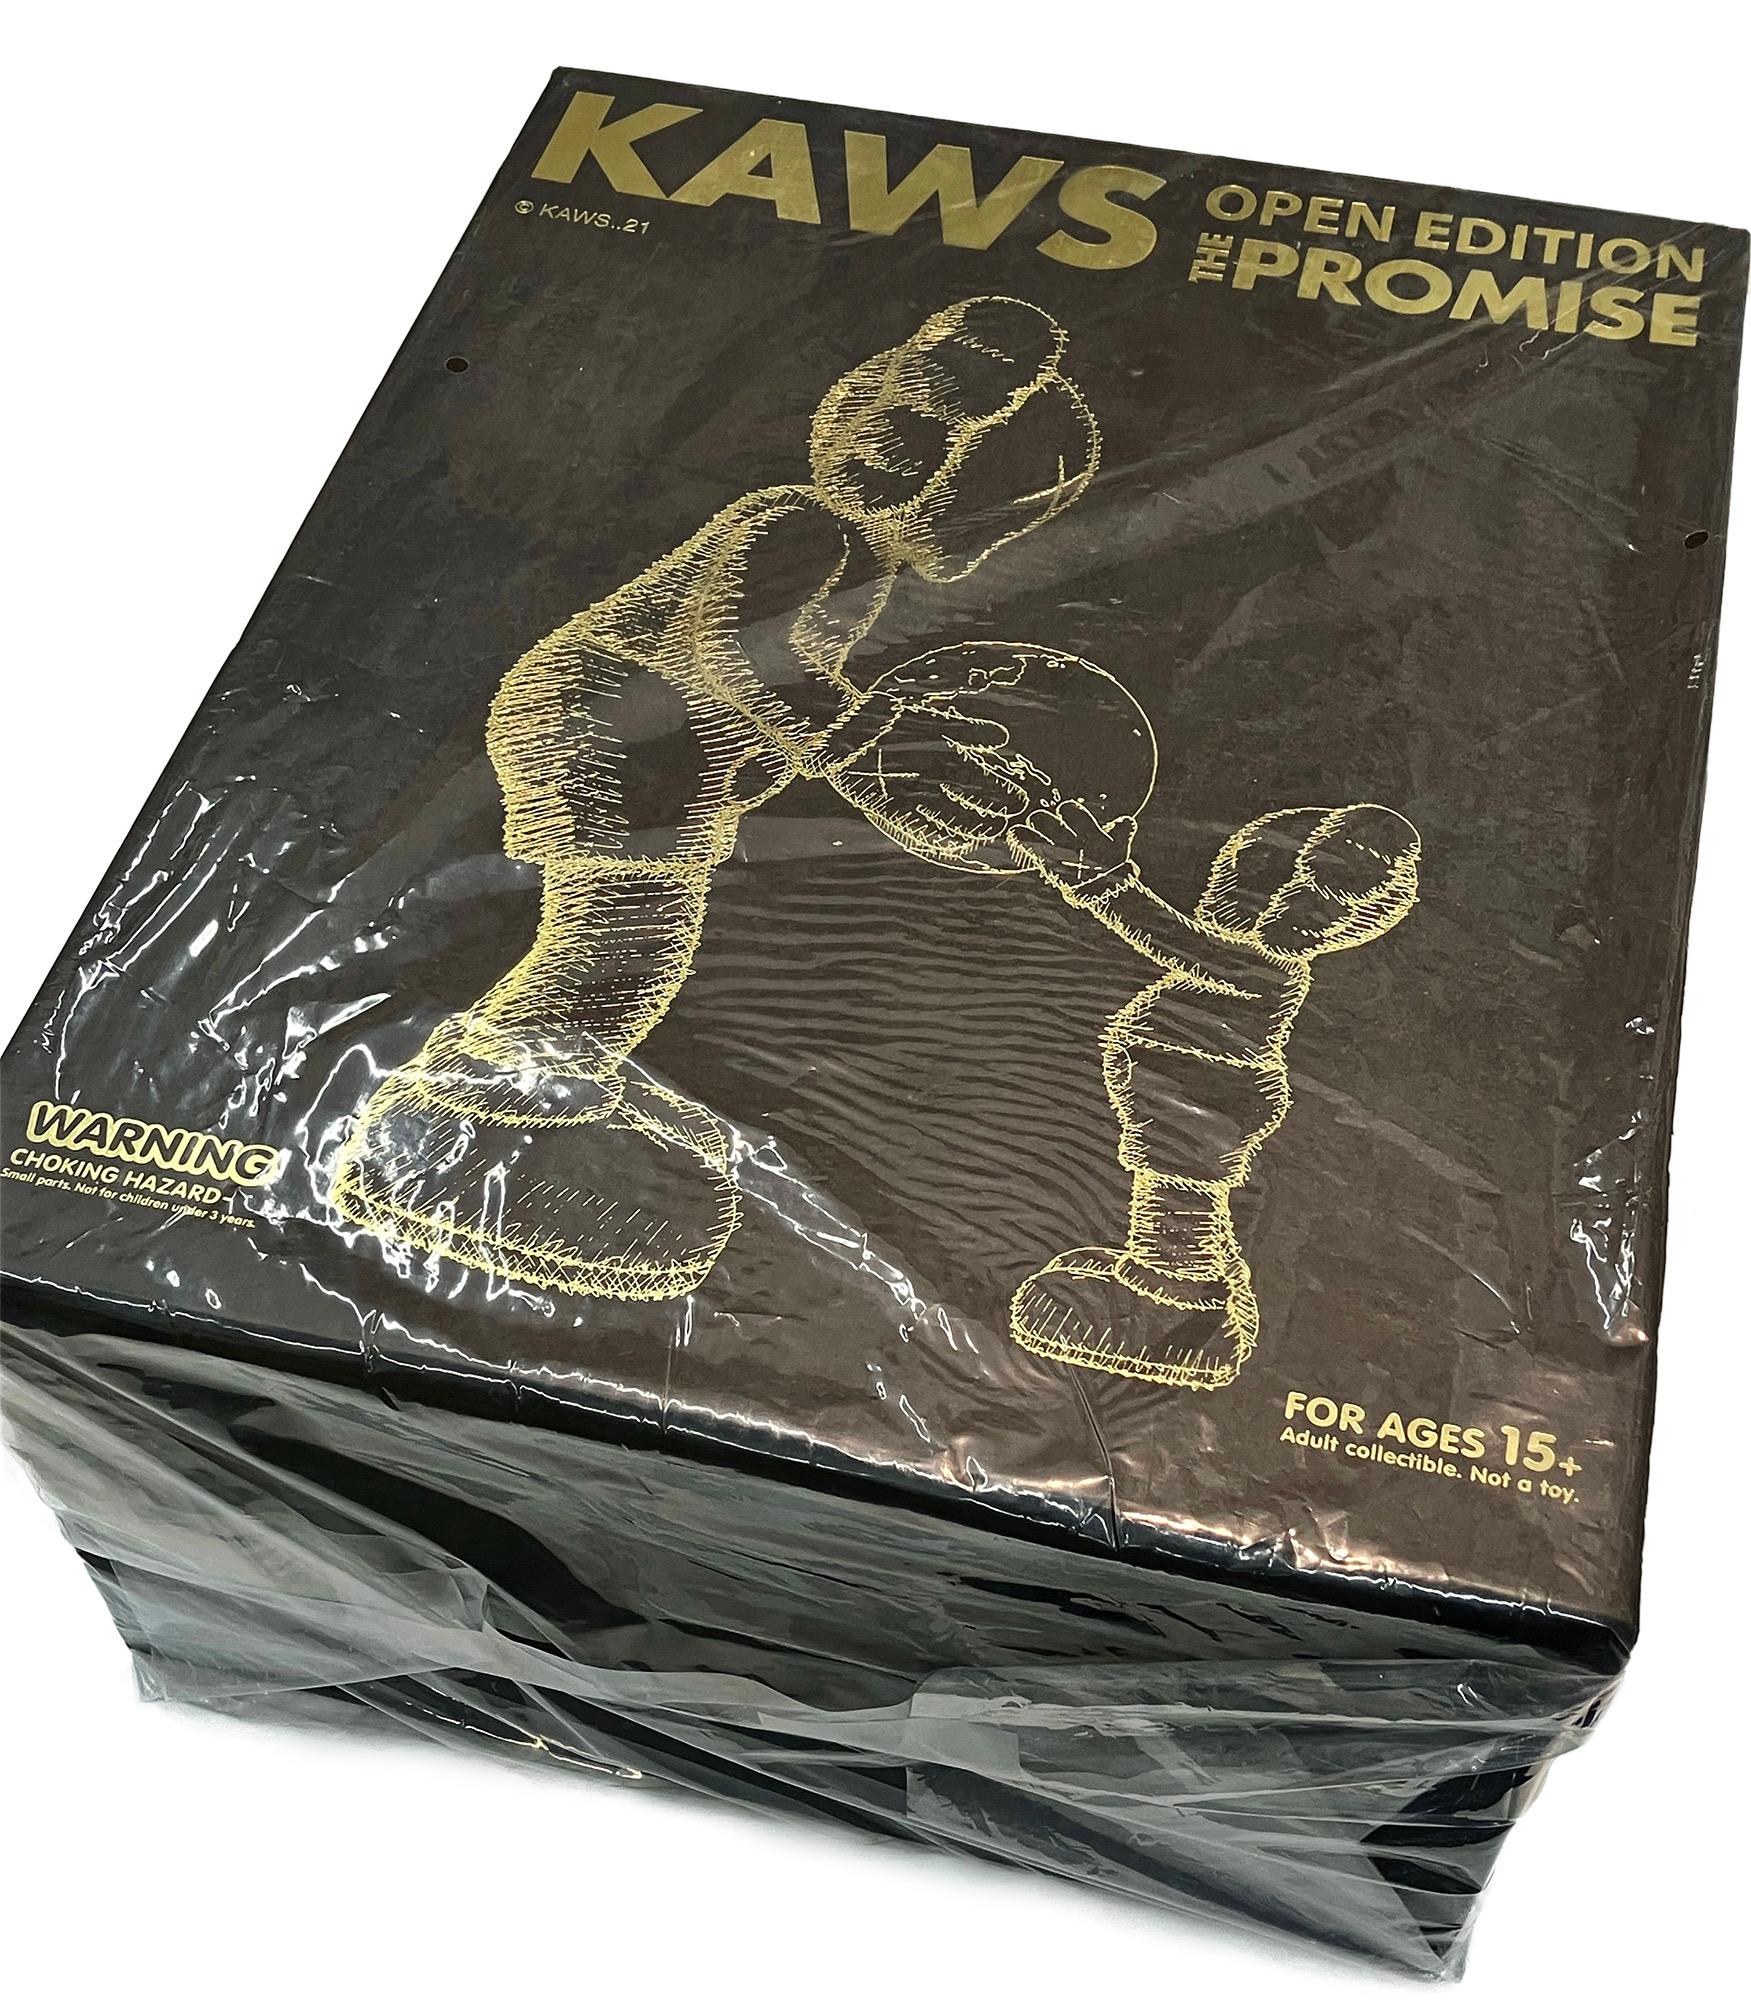 KAWS The Promise (set of 2 works):
A unique KAWS Companion set in the artist’s signature black & brown color-ways. KAWS The Promise features a blue & green globe being affectionately shared between parent & child. These timeless, highly collectible